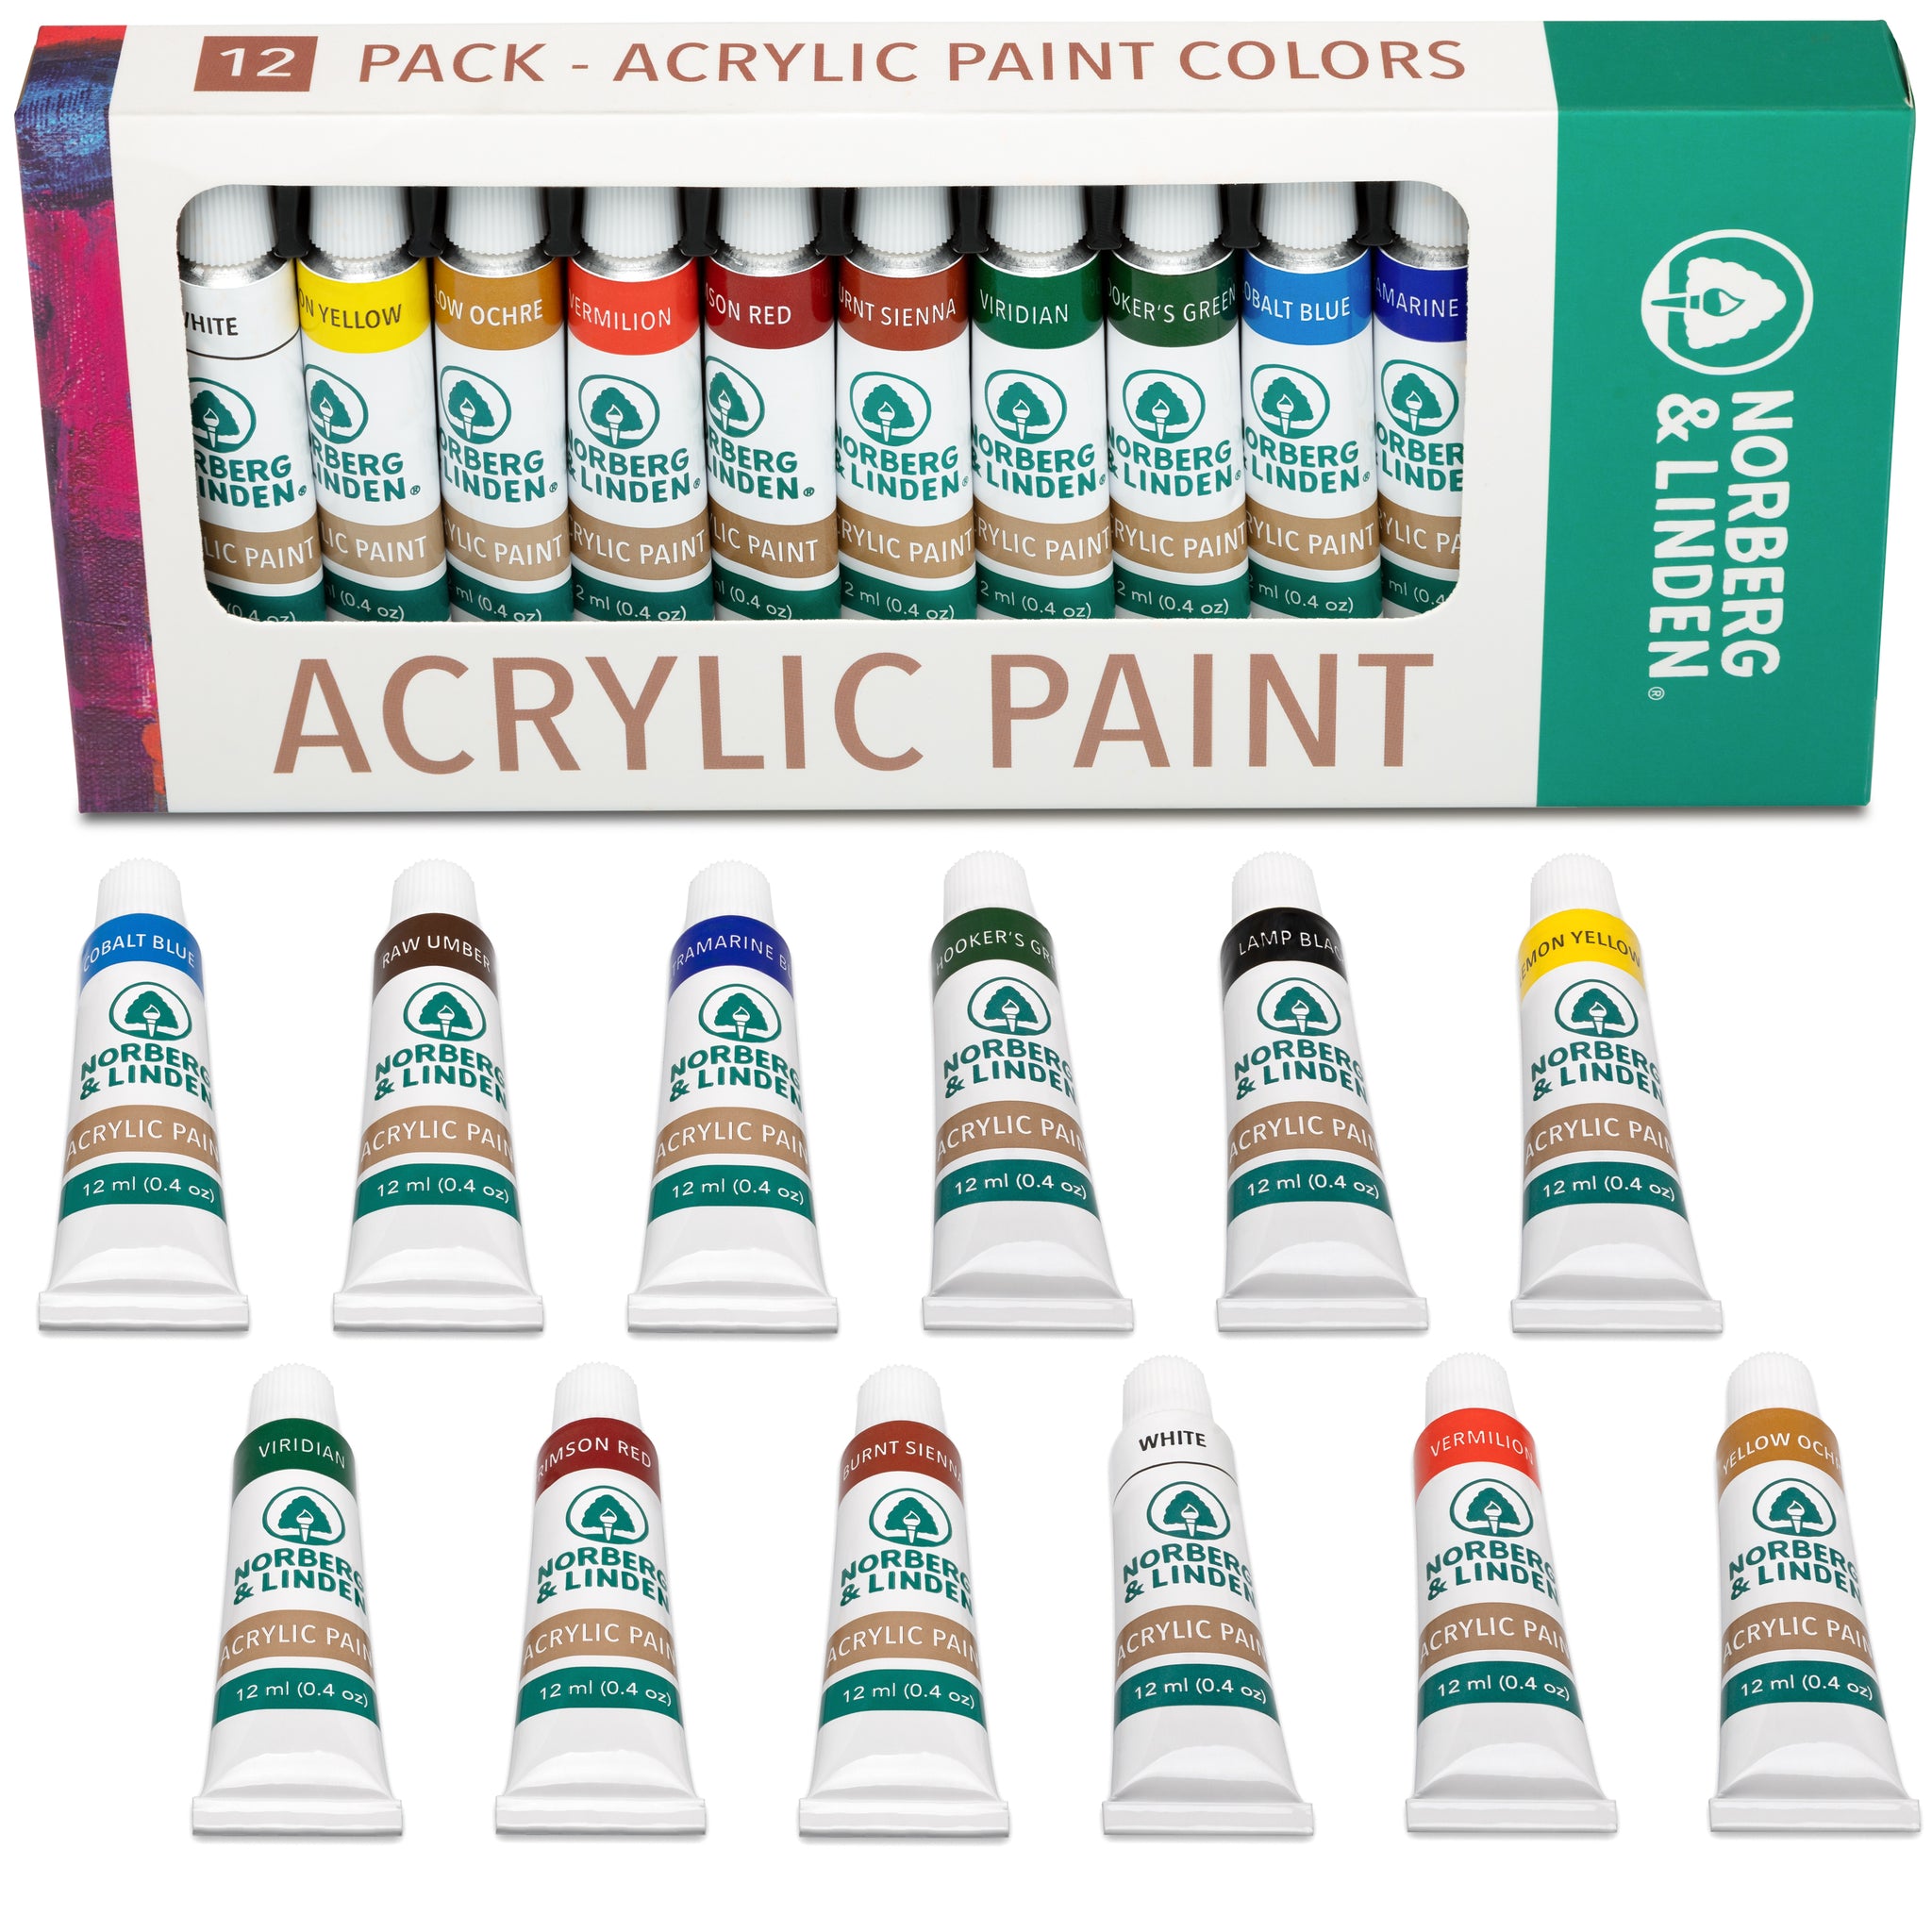  28PCS Acrylic Paint Set for Kids, with Pattern Canvas, Art  Supplies with 12Colors Acrylic Paint, Brushes, Pre-Printed Drawing Board,  Perfect Paint Set Gift for Beginner Student Toddlers